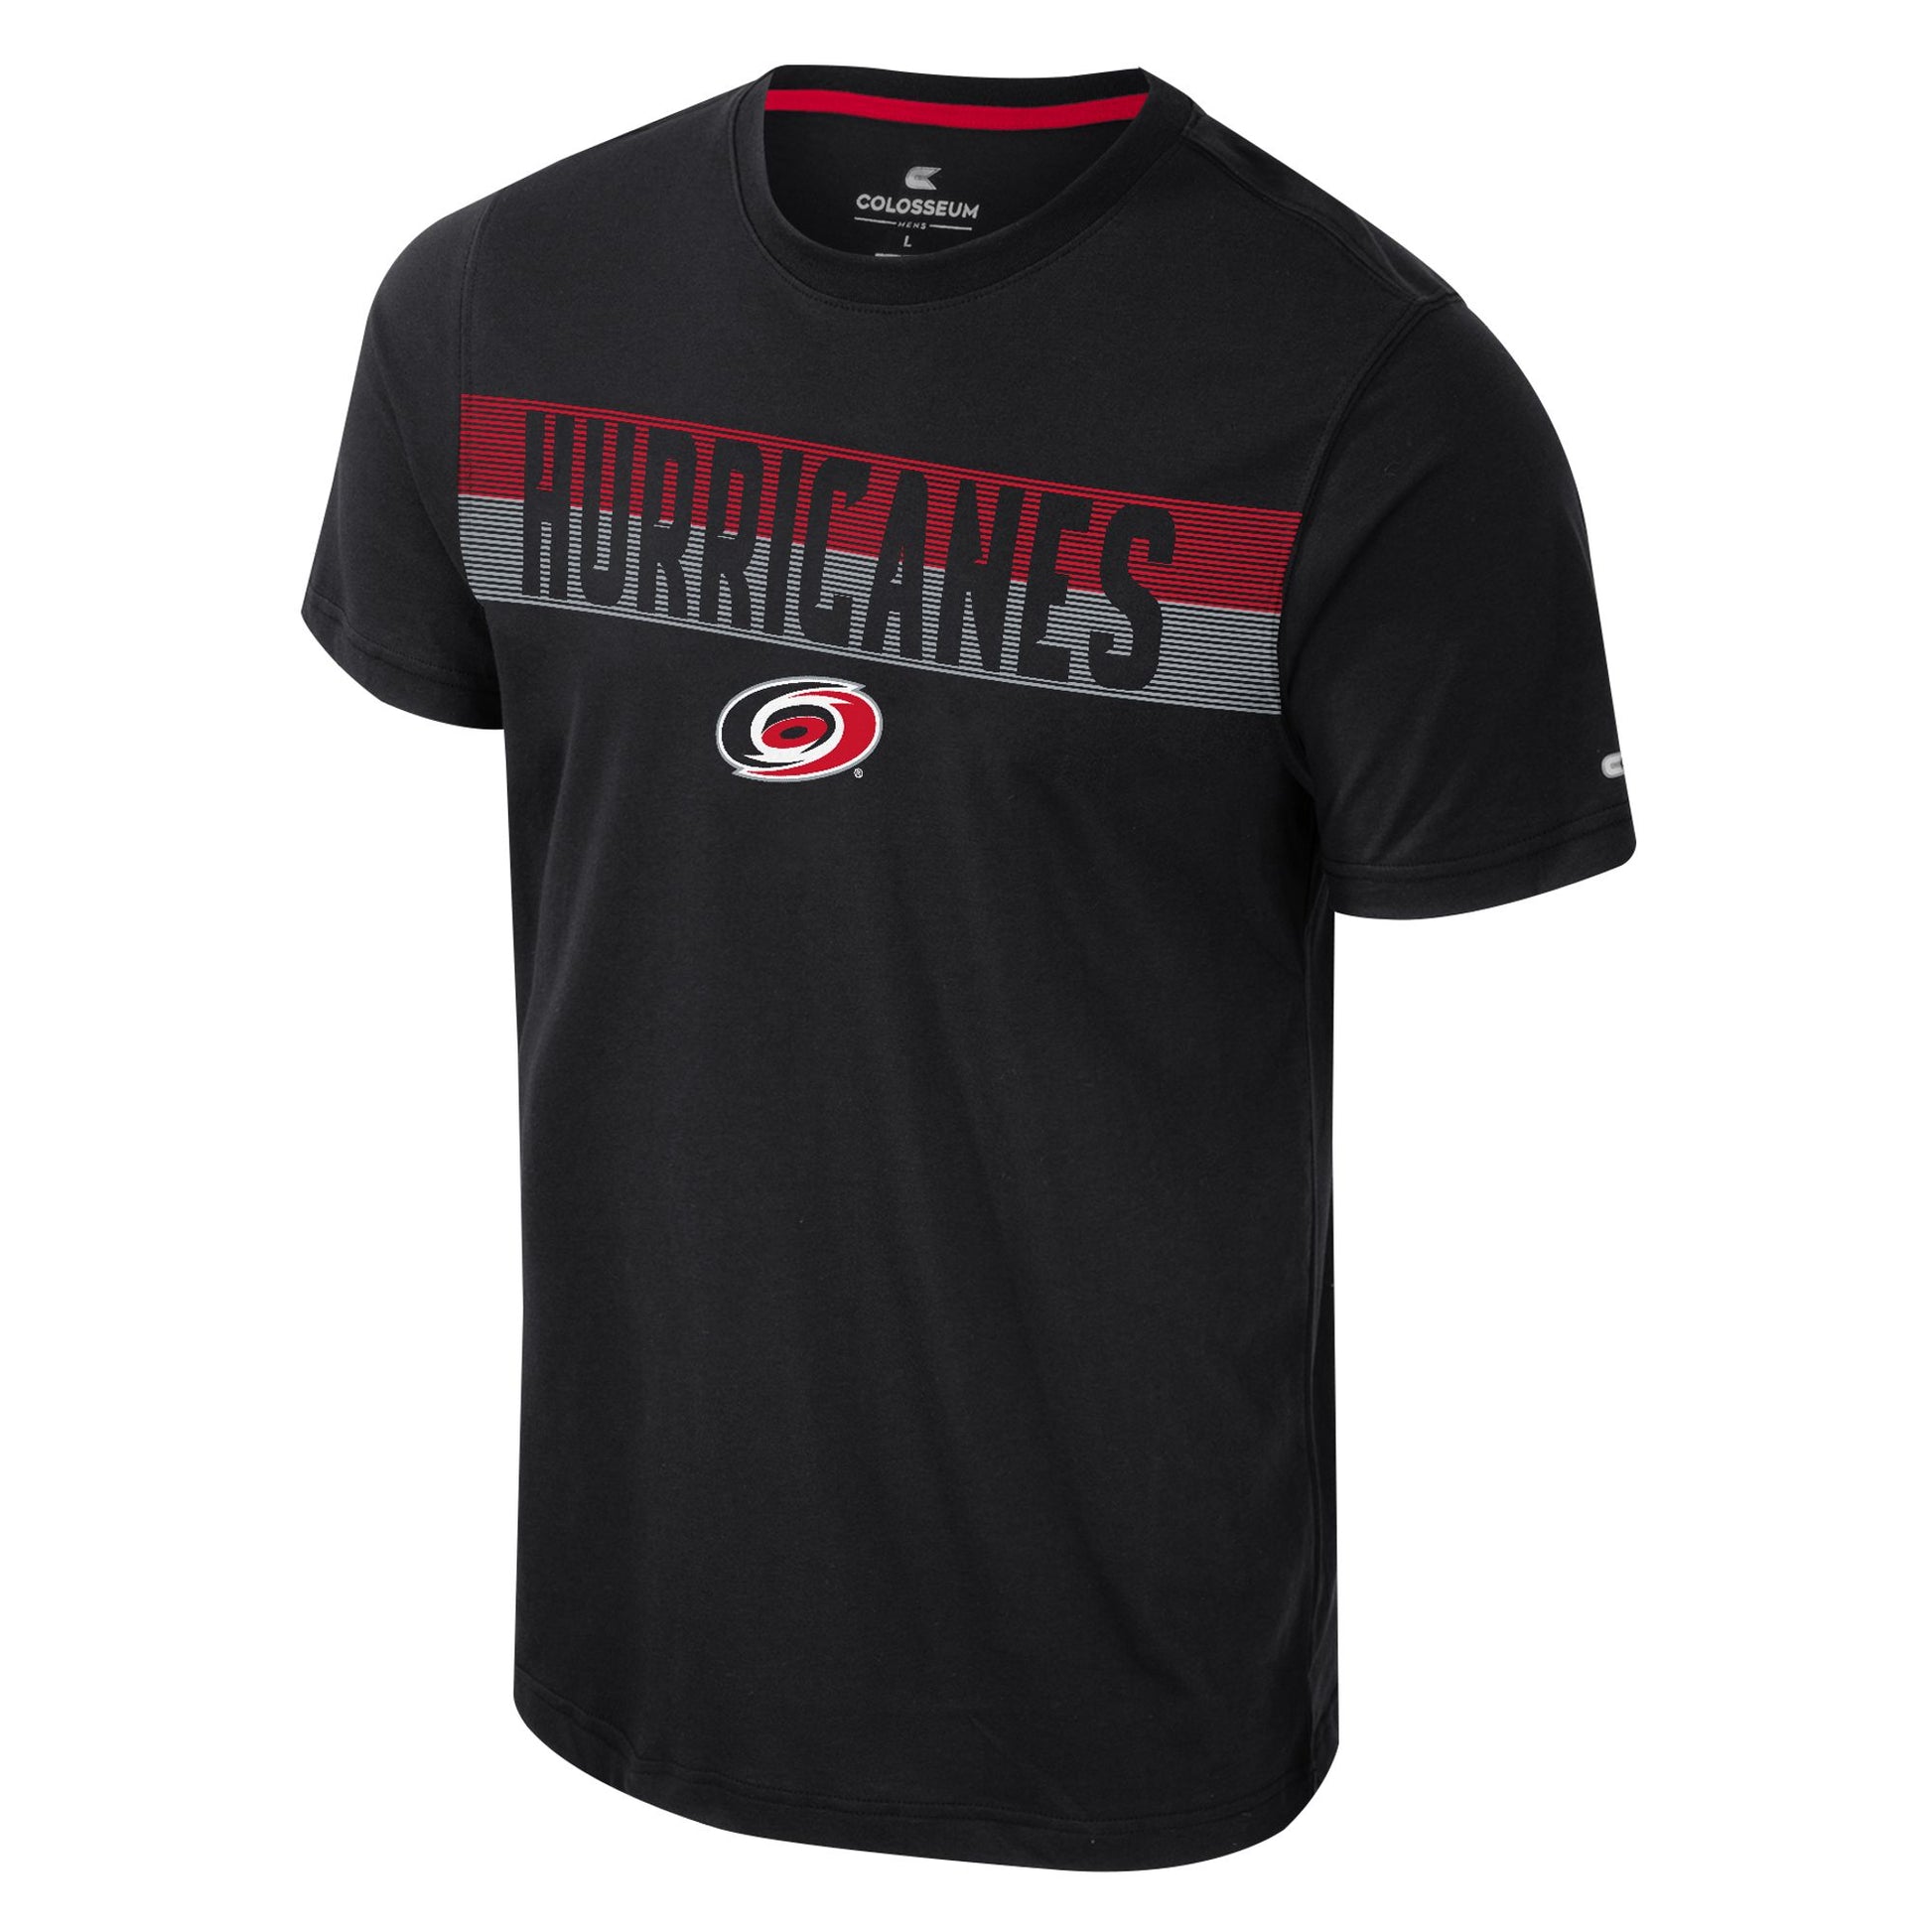 Front: Hurricanes in black on top of red and white shapes and Hurricanes logo underneath